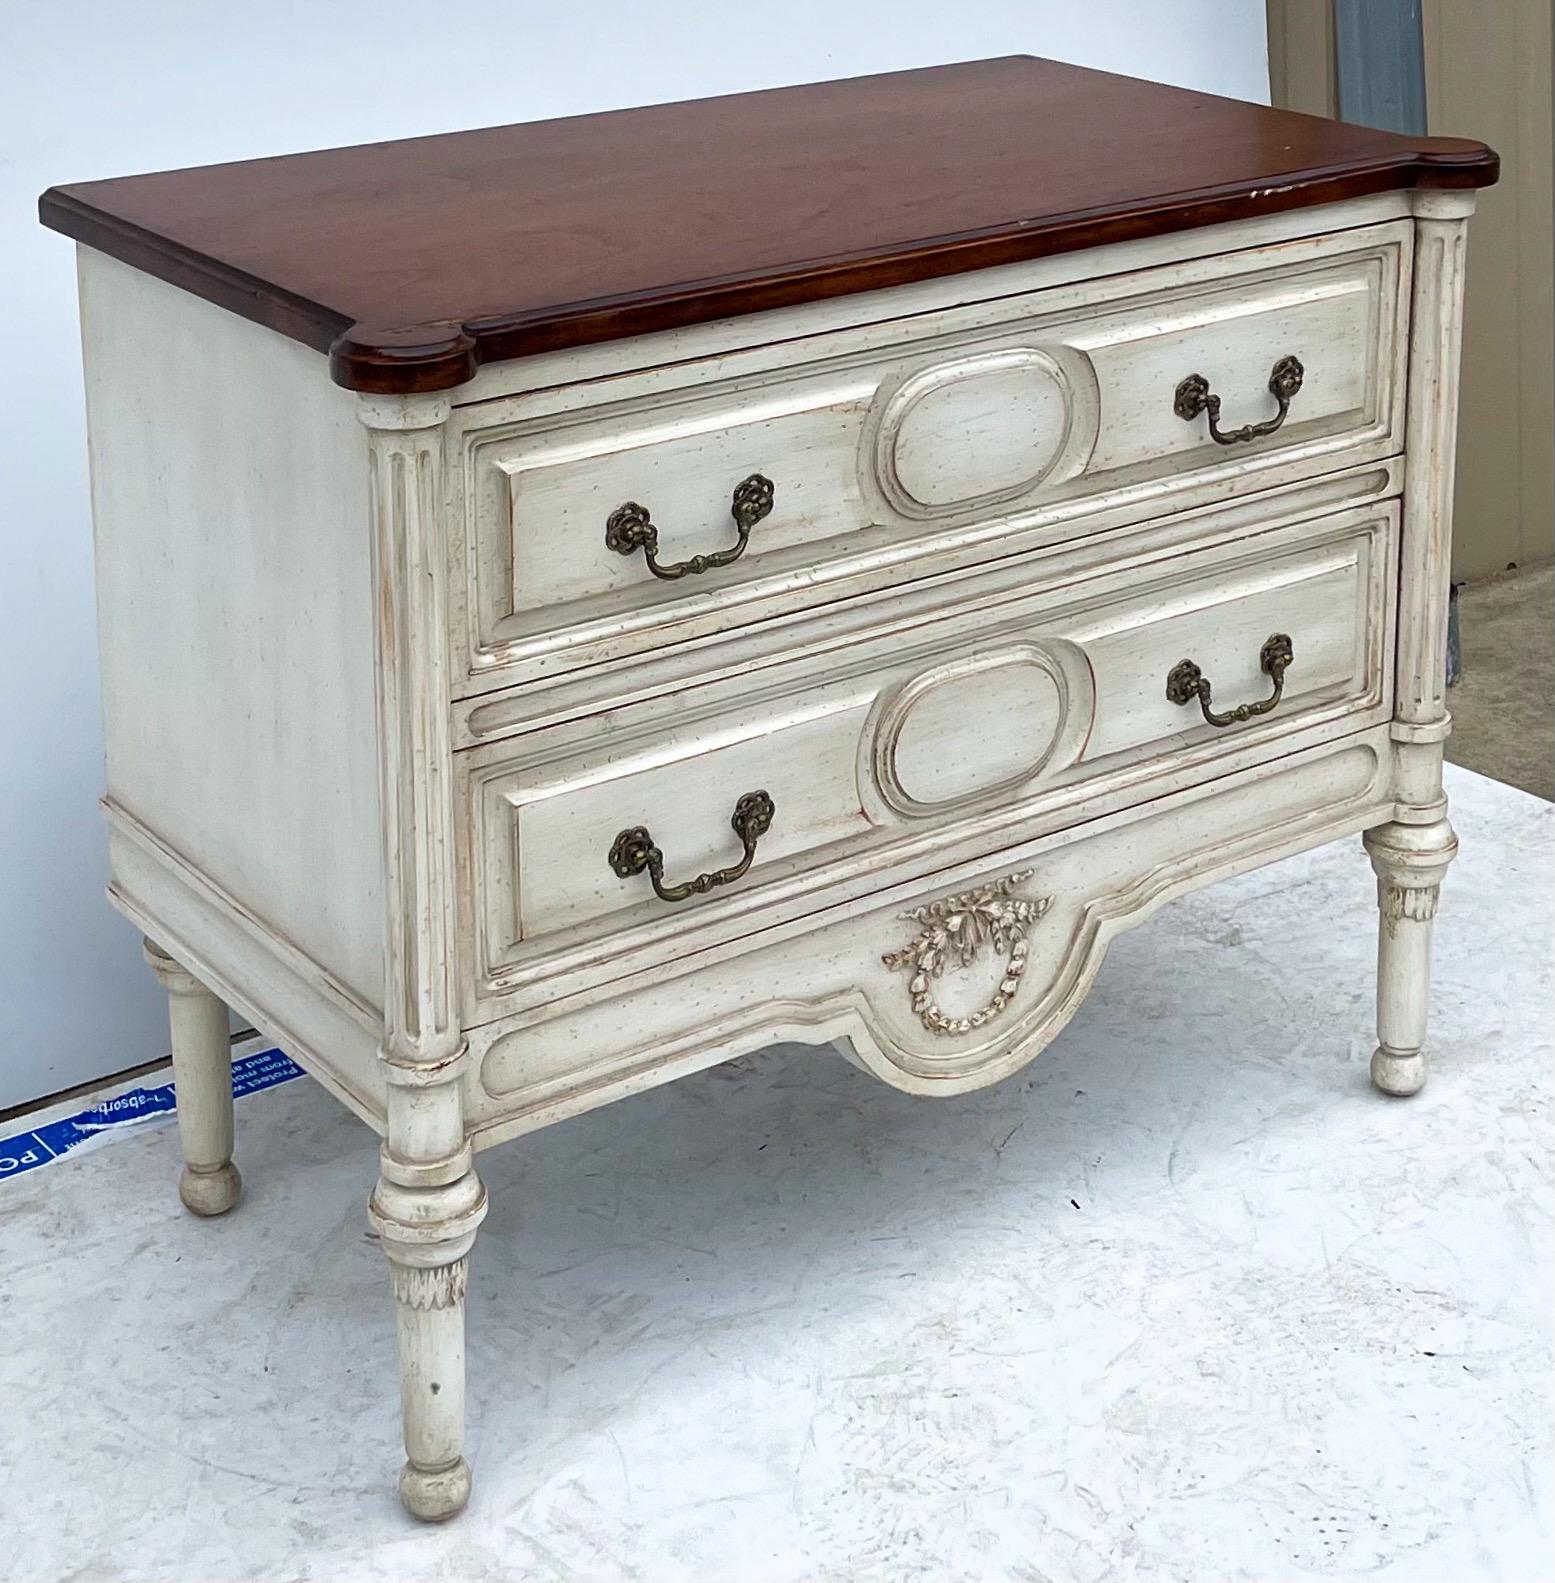 Late 20th-C. Custom French Neo-Classical Style Painted Chests / Side Tables - 2 In Good Condition For Sale In Kennesaw, GA